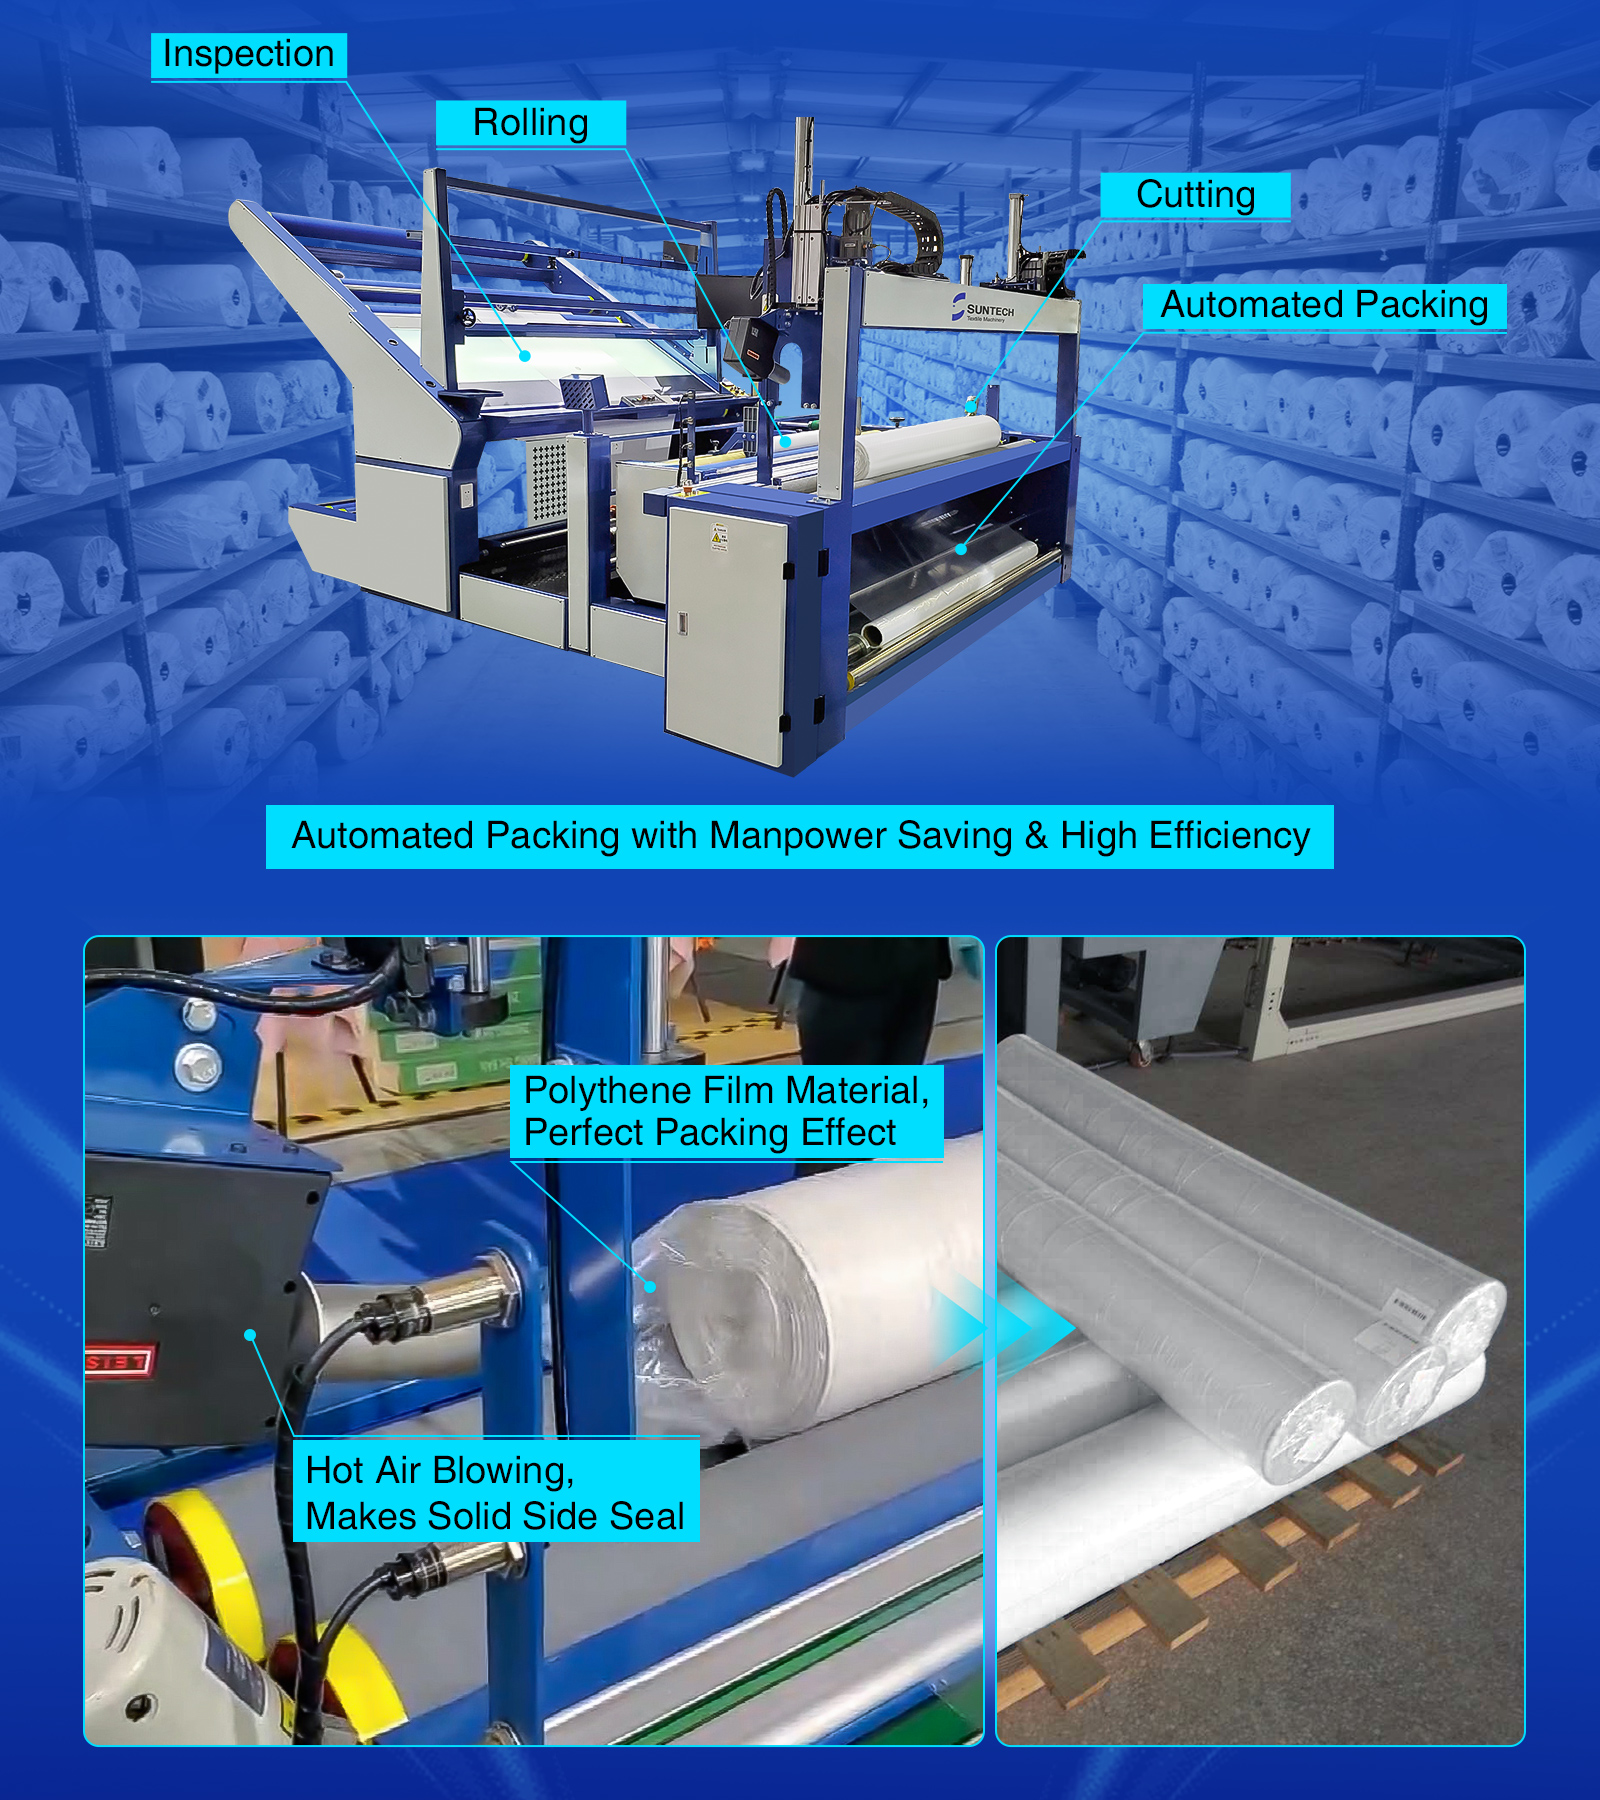 Inspection & Automated Packing in One, Worry-free for Packing Effect, Satisfy Your Customers Always